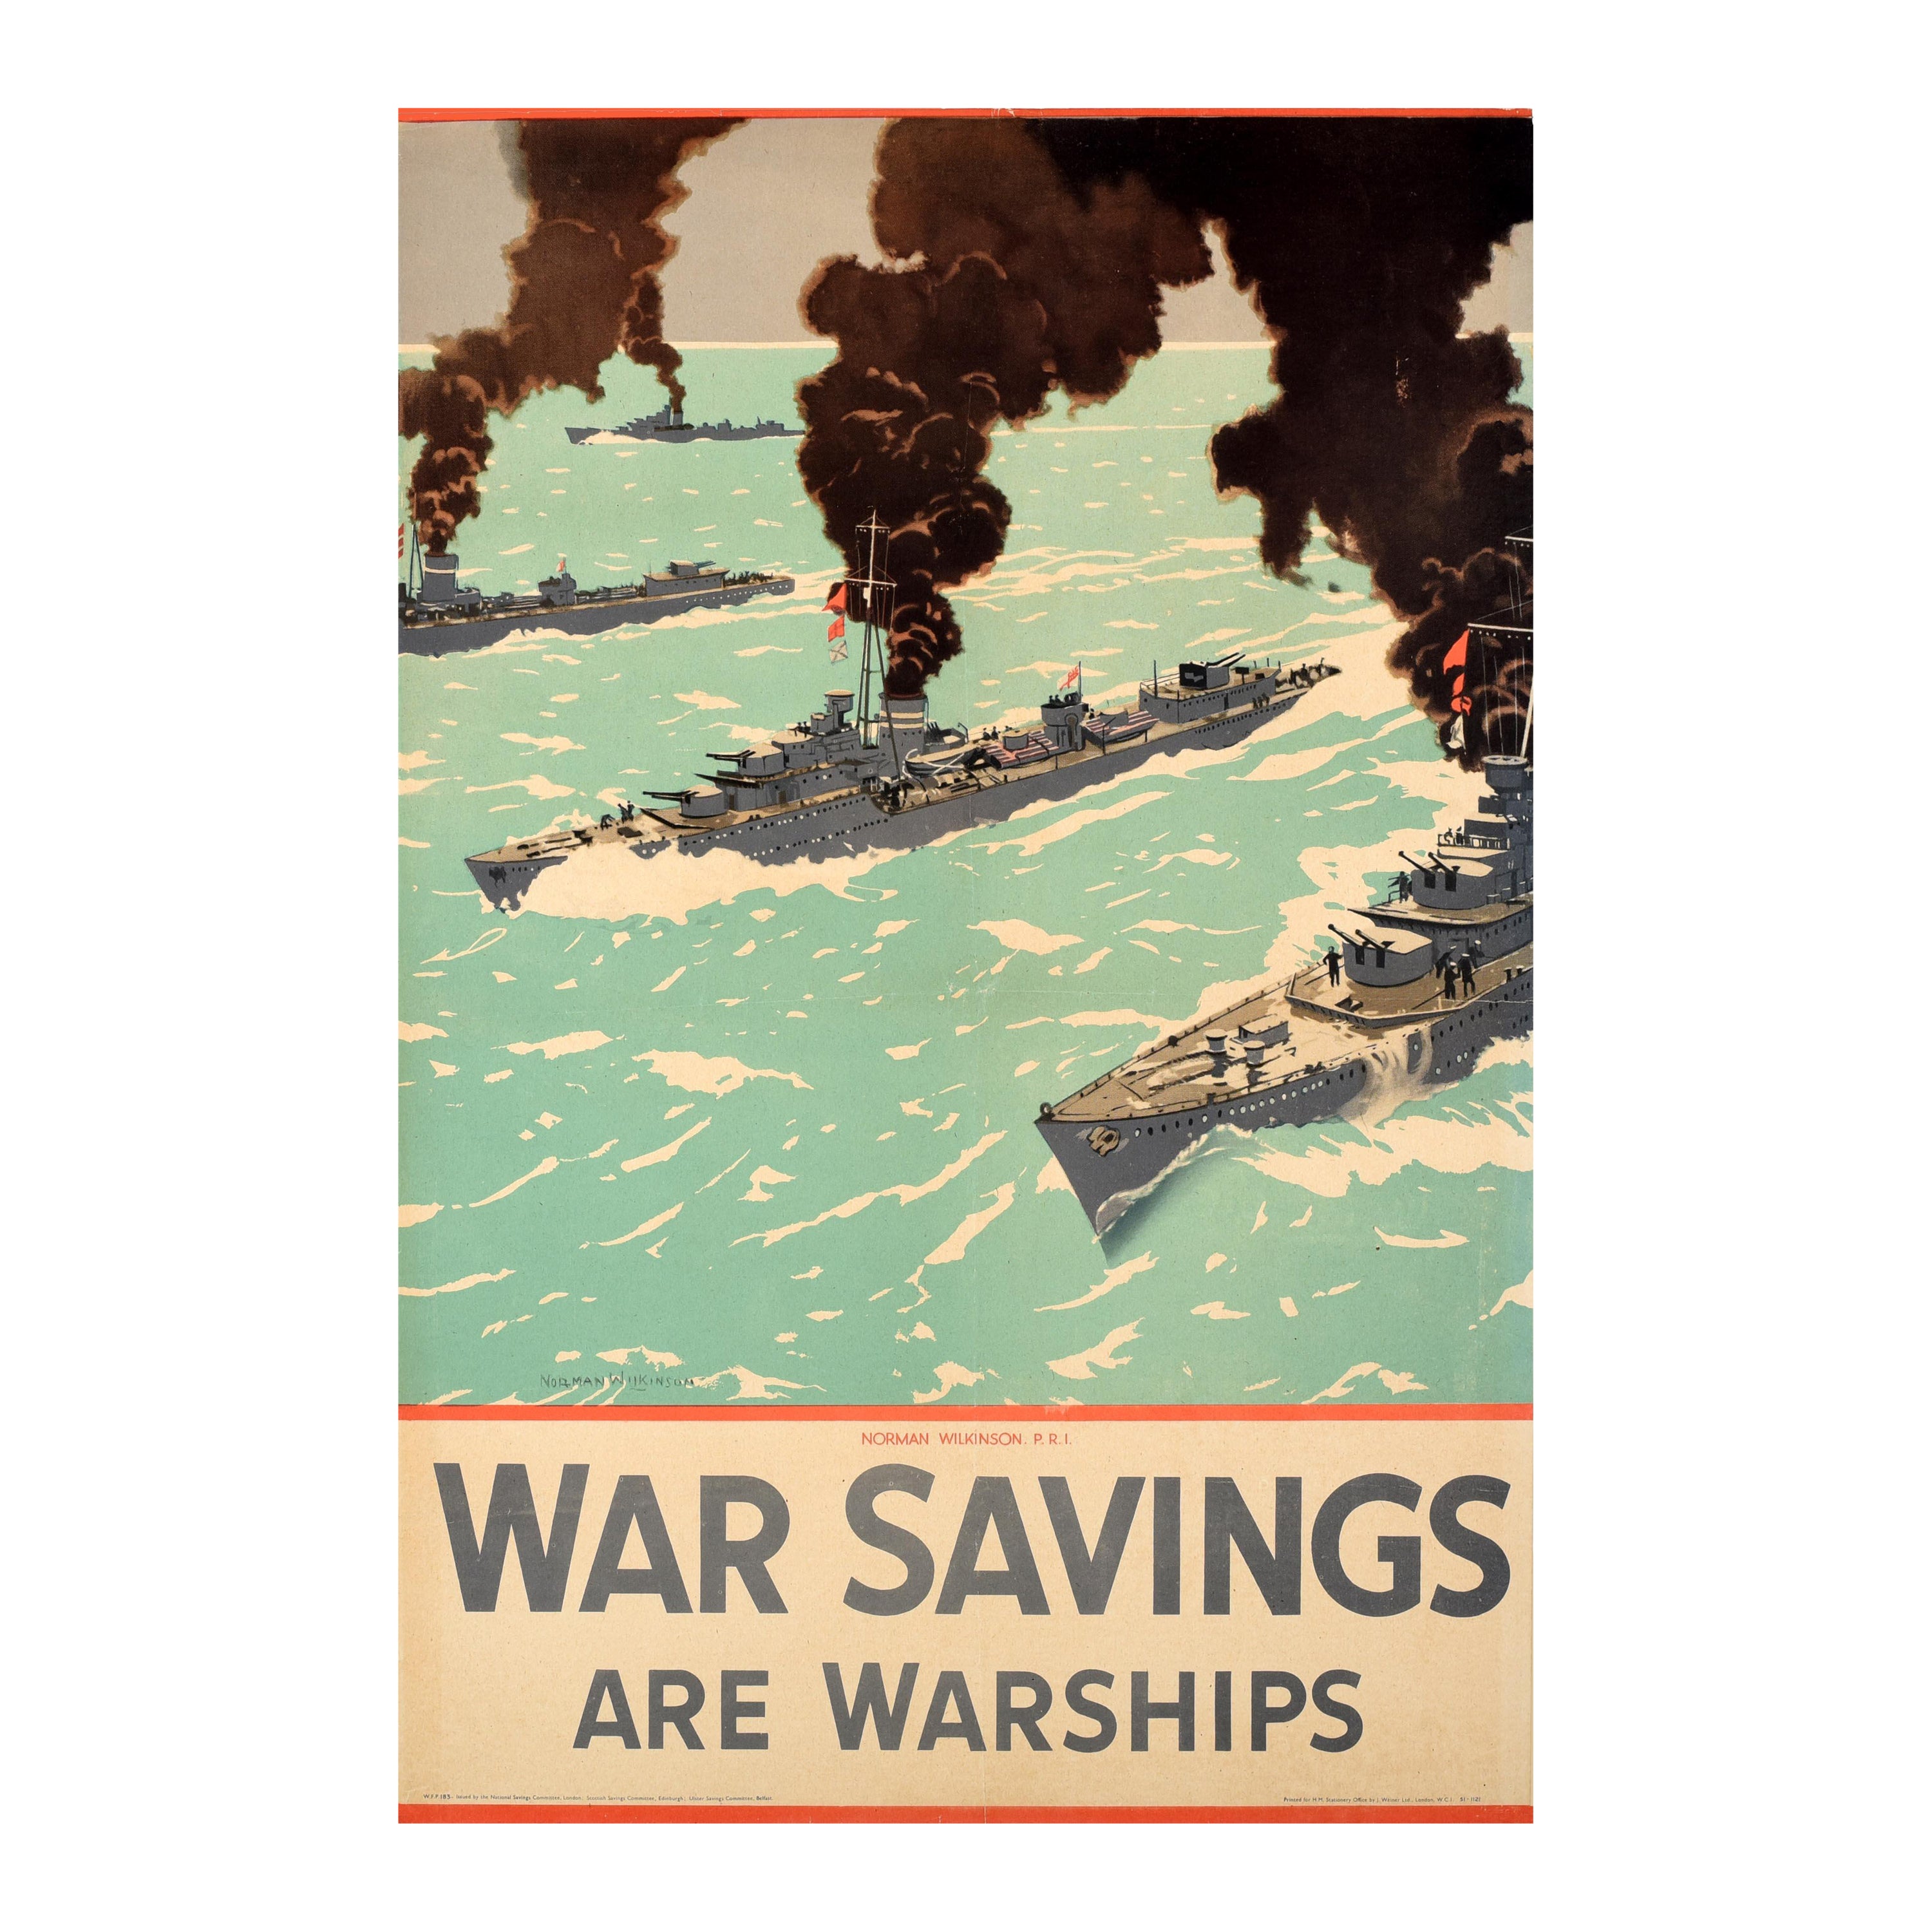 Original Vintage WWII Poster War Savings Are Warships Norman Wilkinson Navy Art For Sale